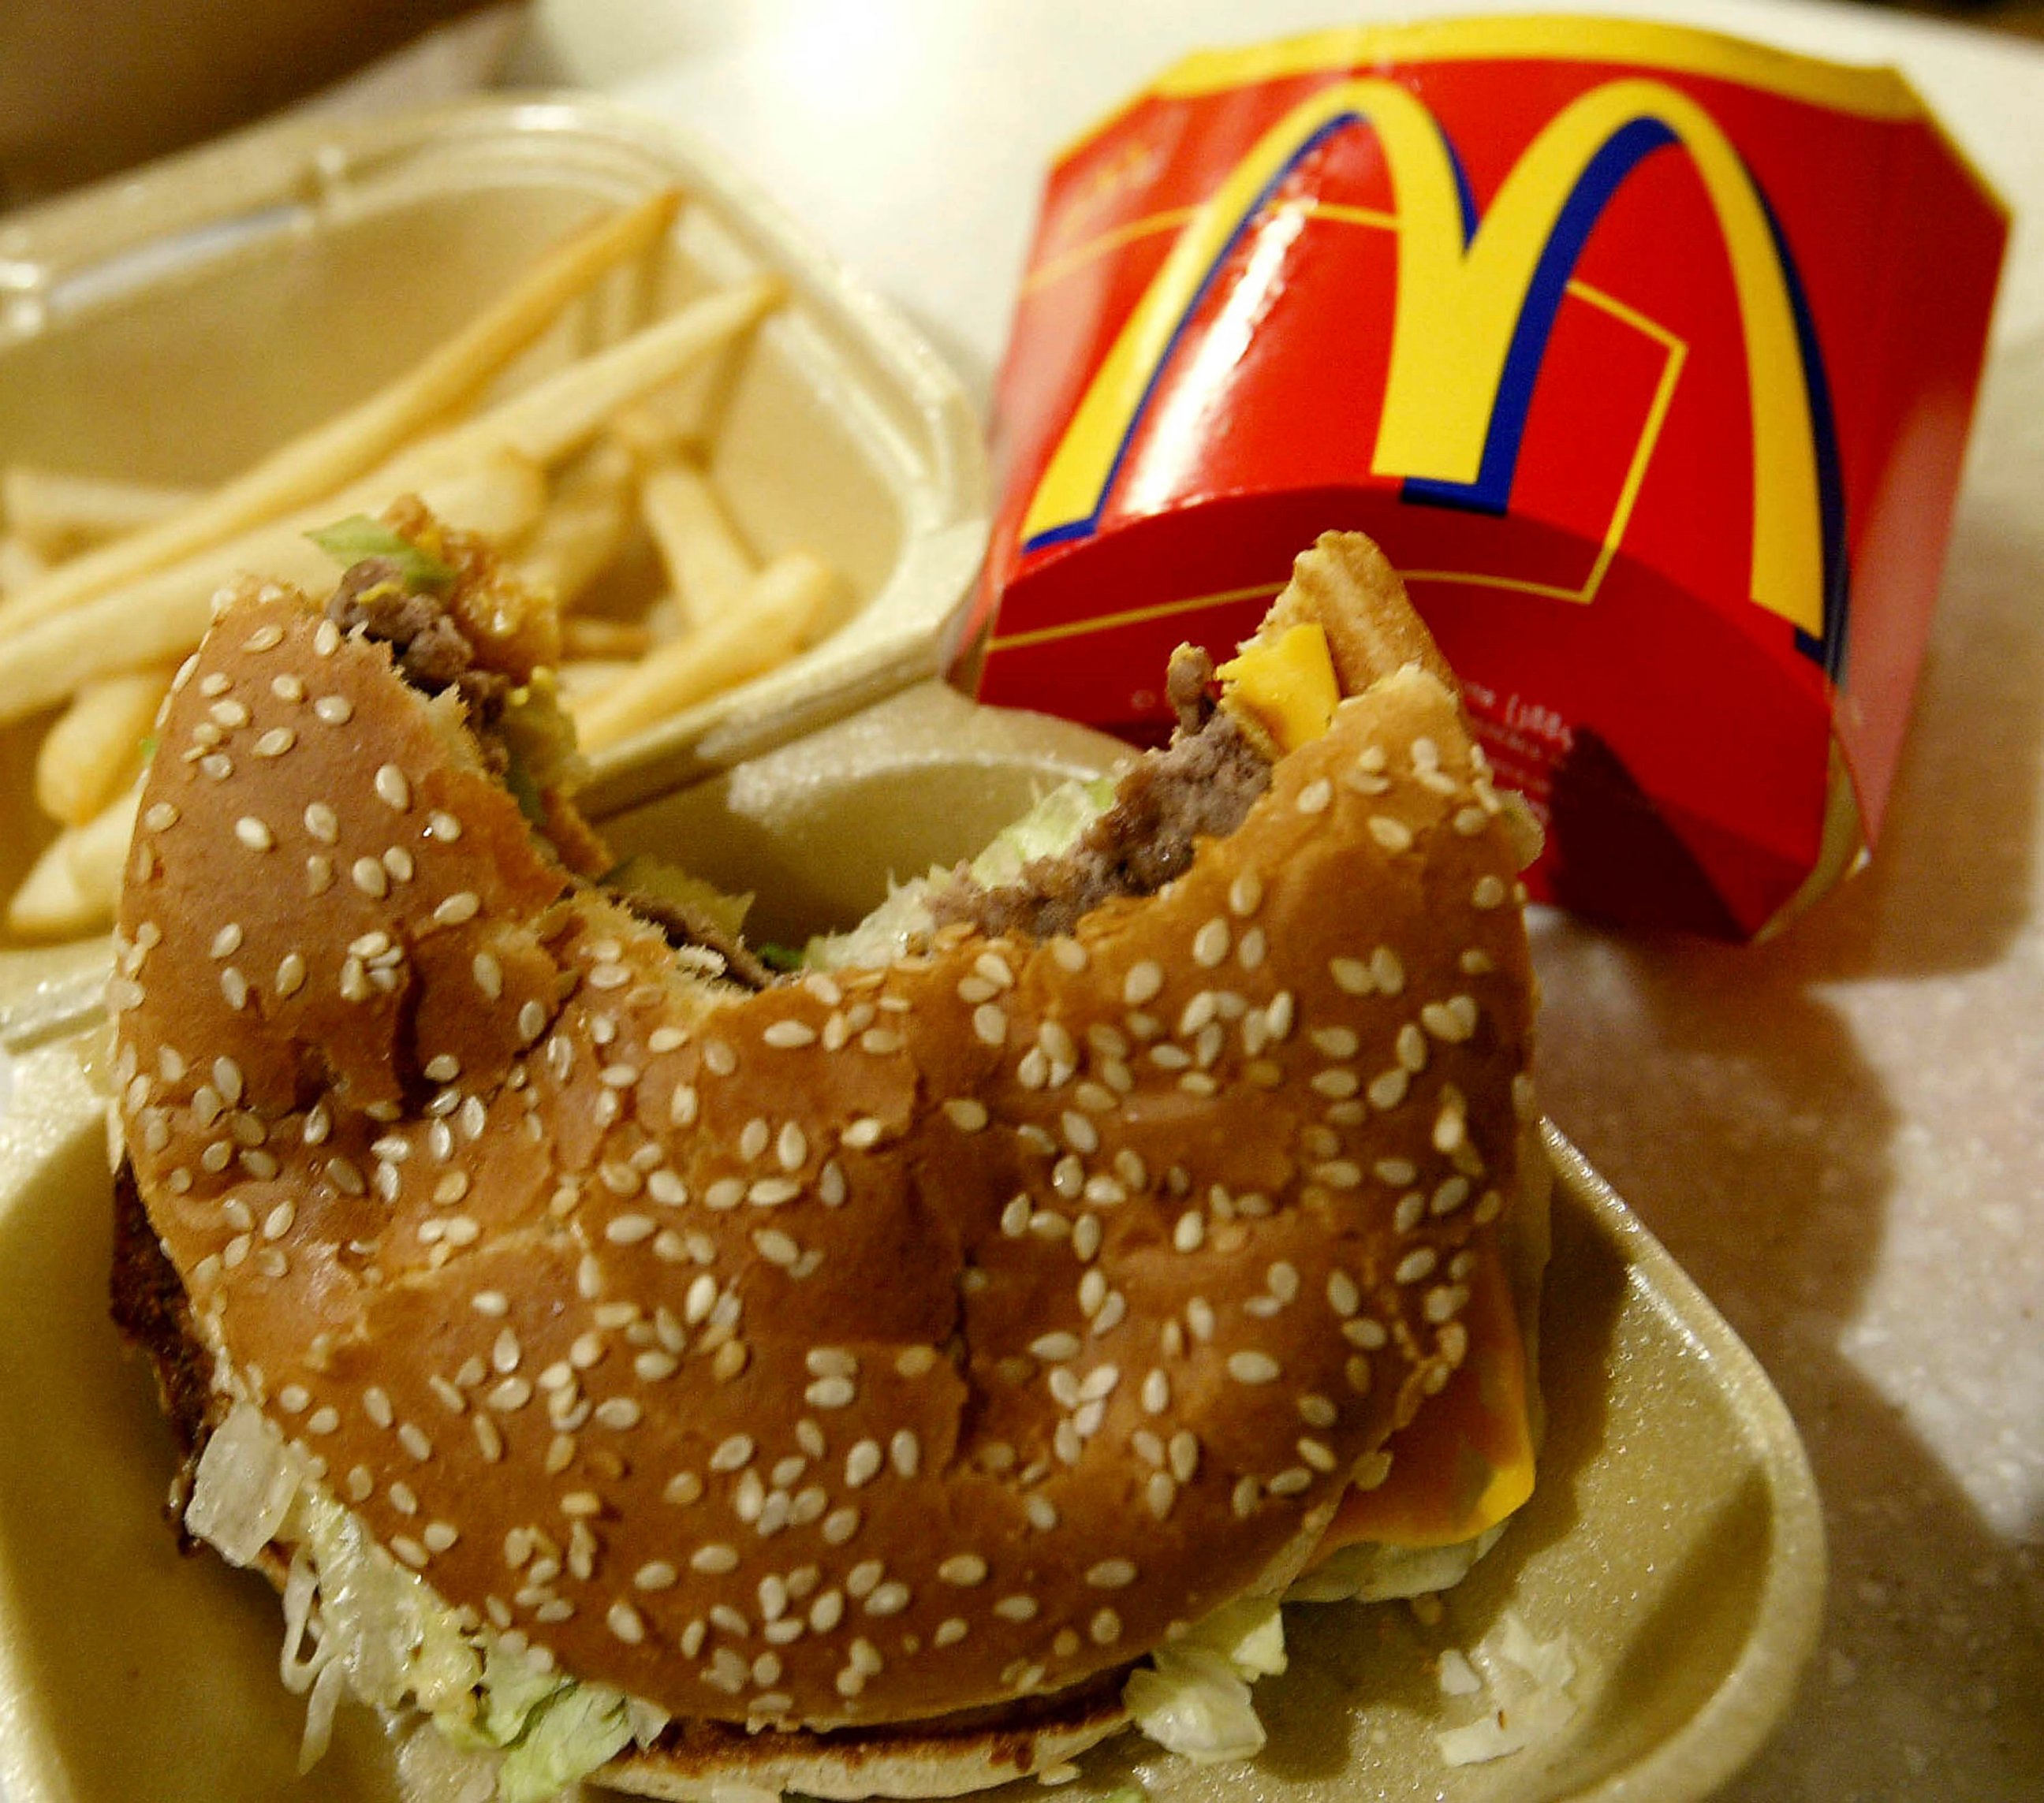 PHOTO: Food lies on the counter at a McDonalds restaurant on Nov. 27, 2003 in London.  